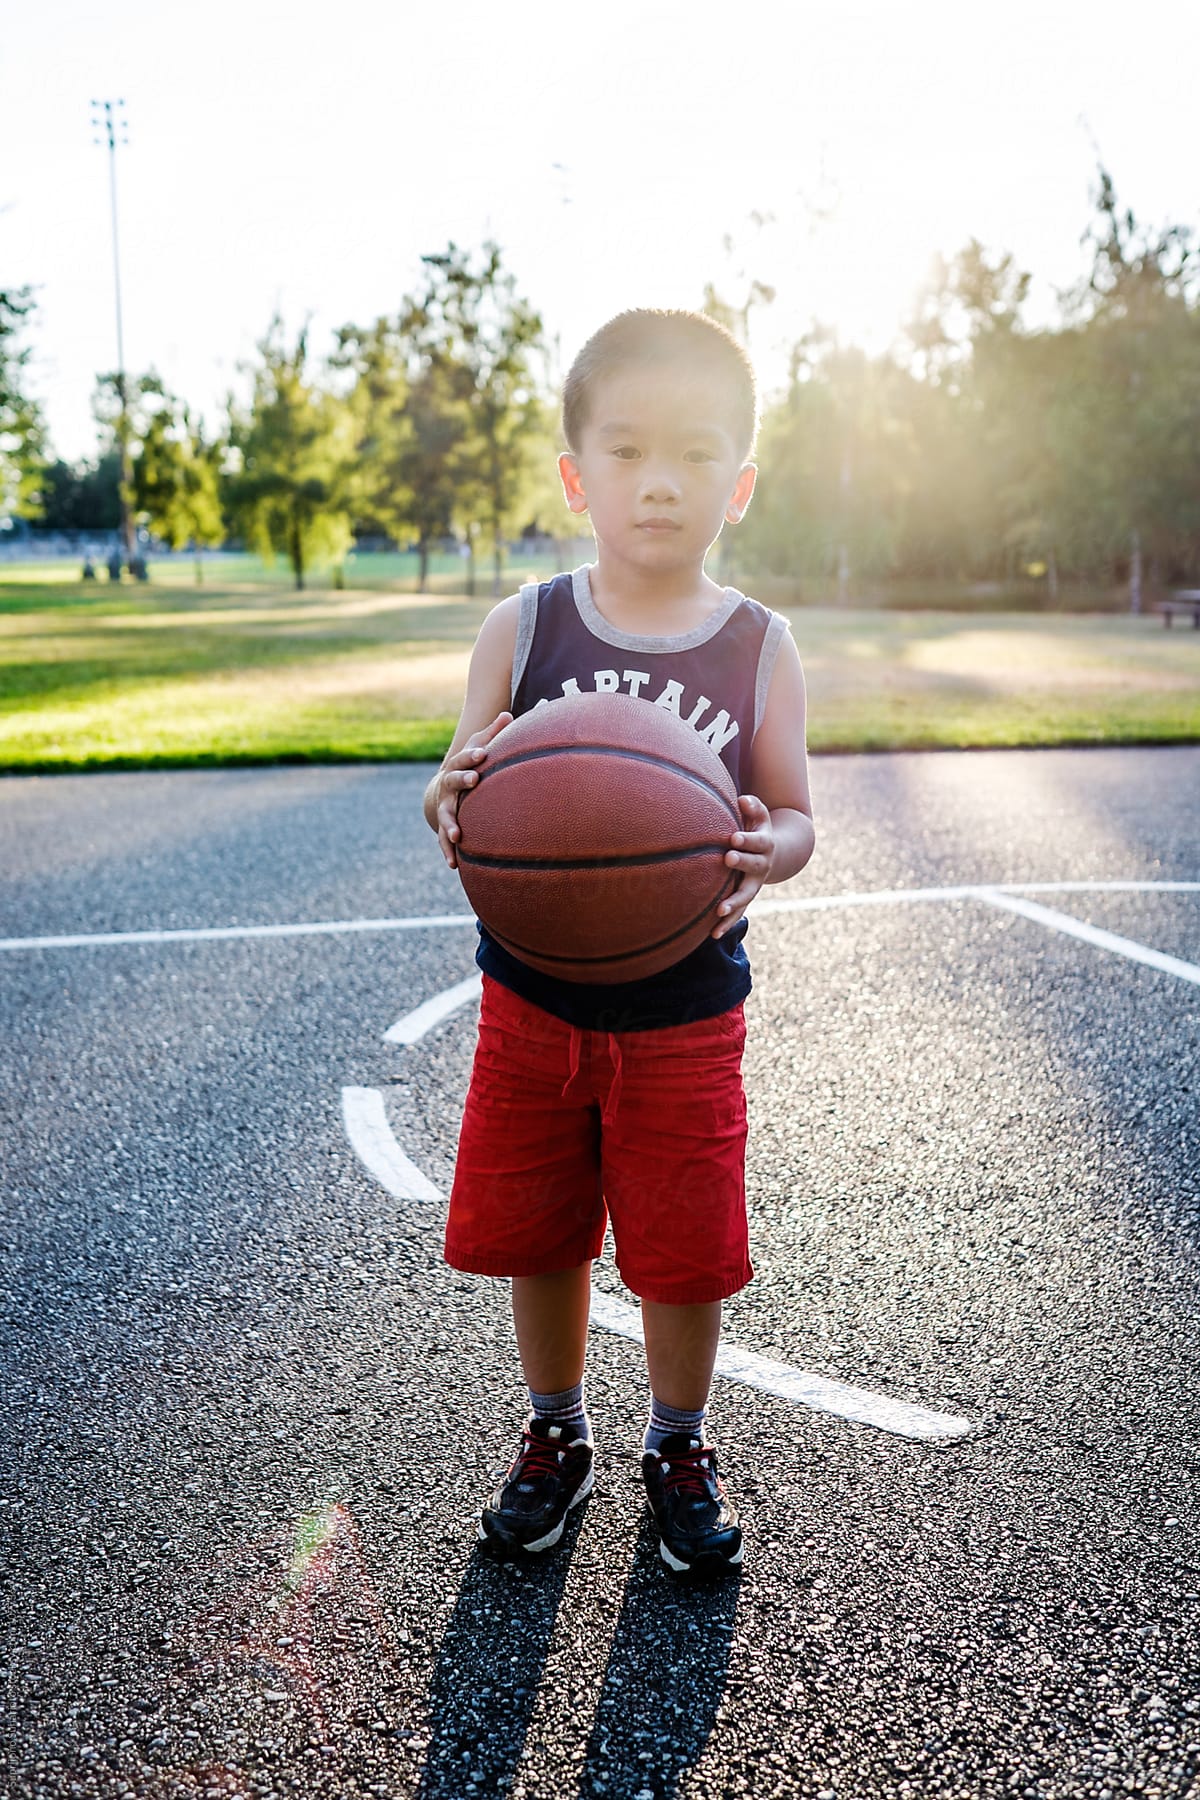 Asian kid holding a basketball in an outdoor basketball court